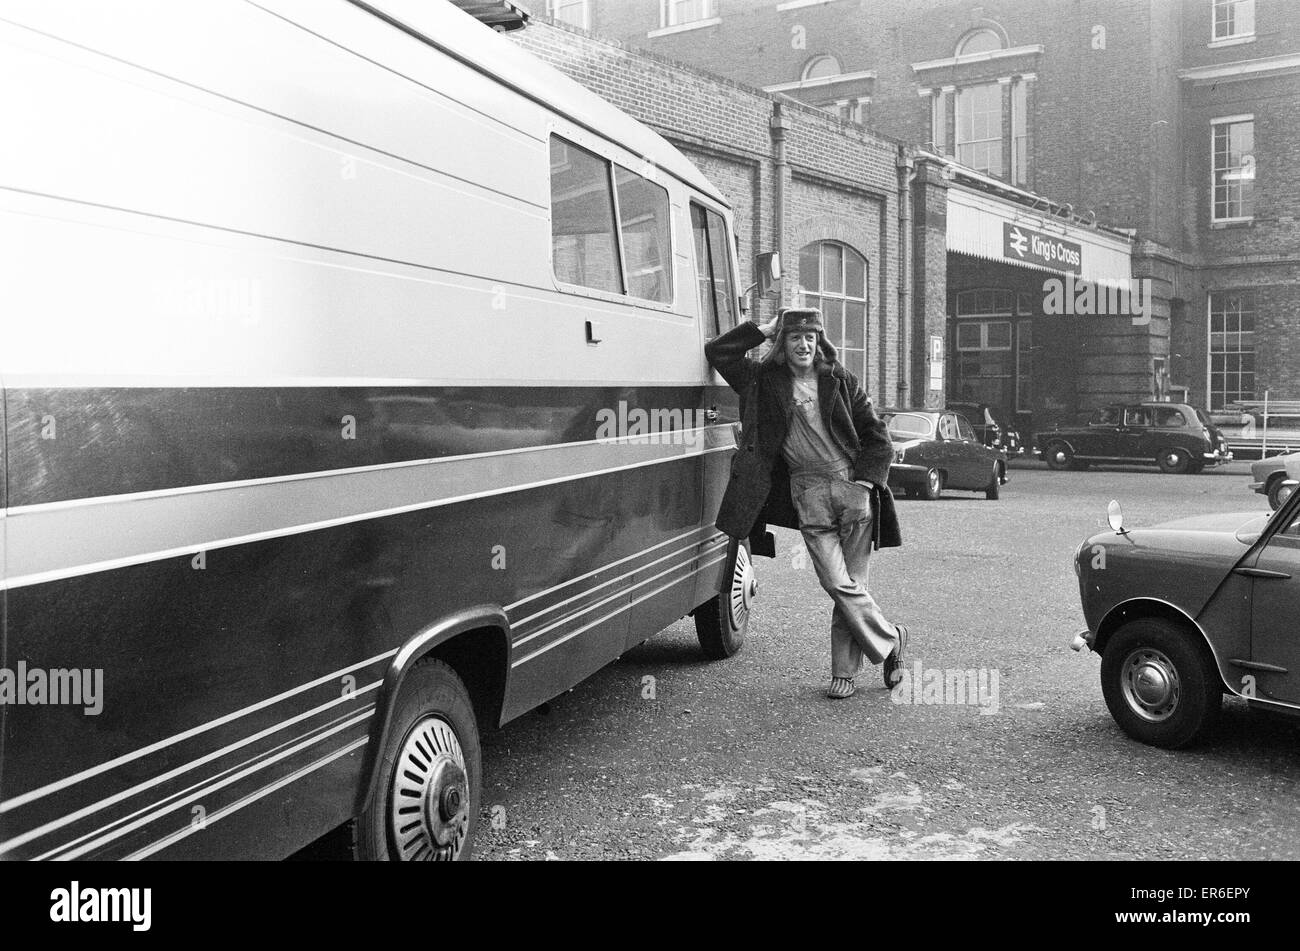 'A day in the life of Jimmy Saville' Feature by Mike Hellicar.  Here he is pictured posing beside his motor home caravan outside Kings Cross railway station. 7th October 1971. Stock Photo